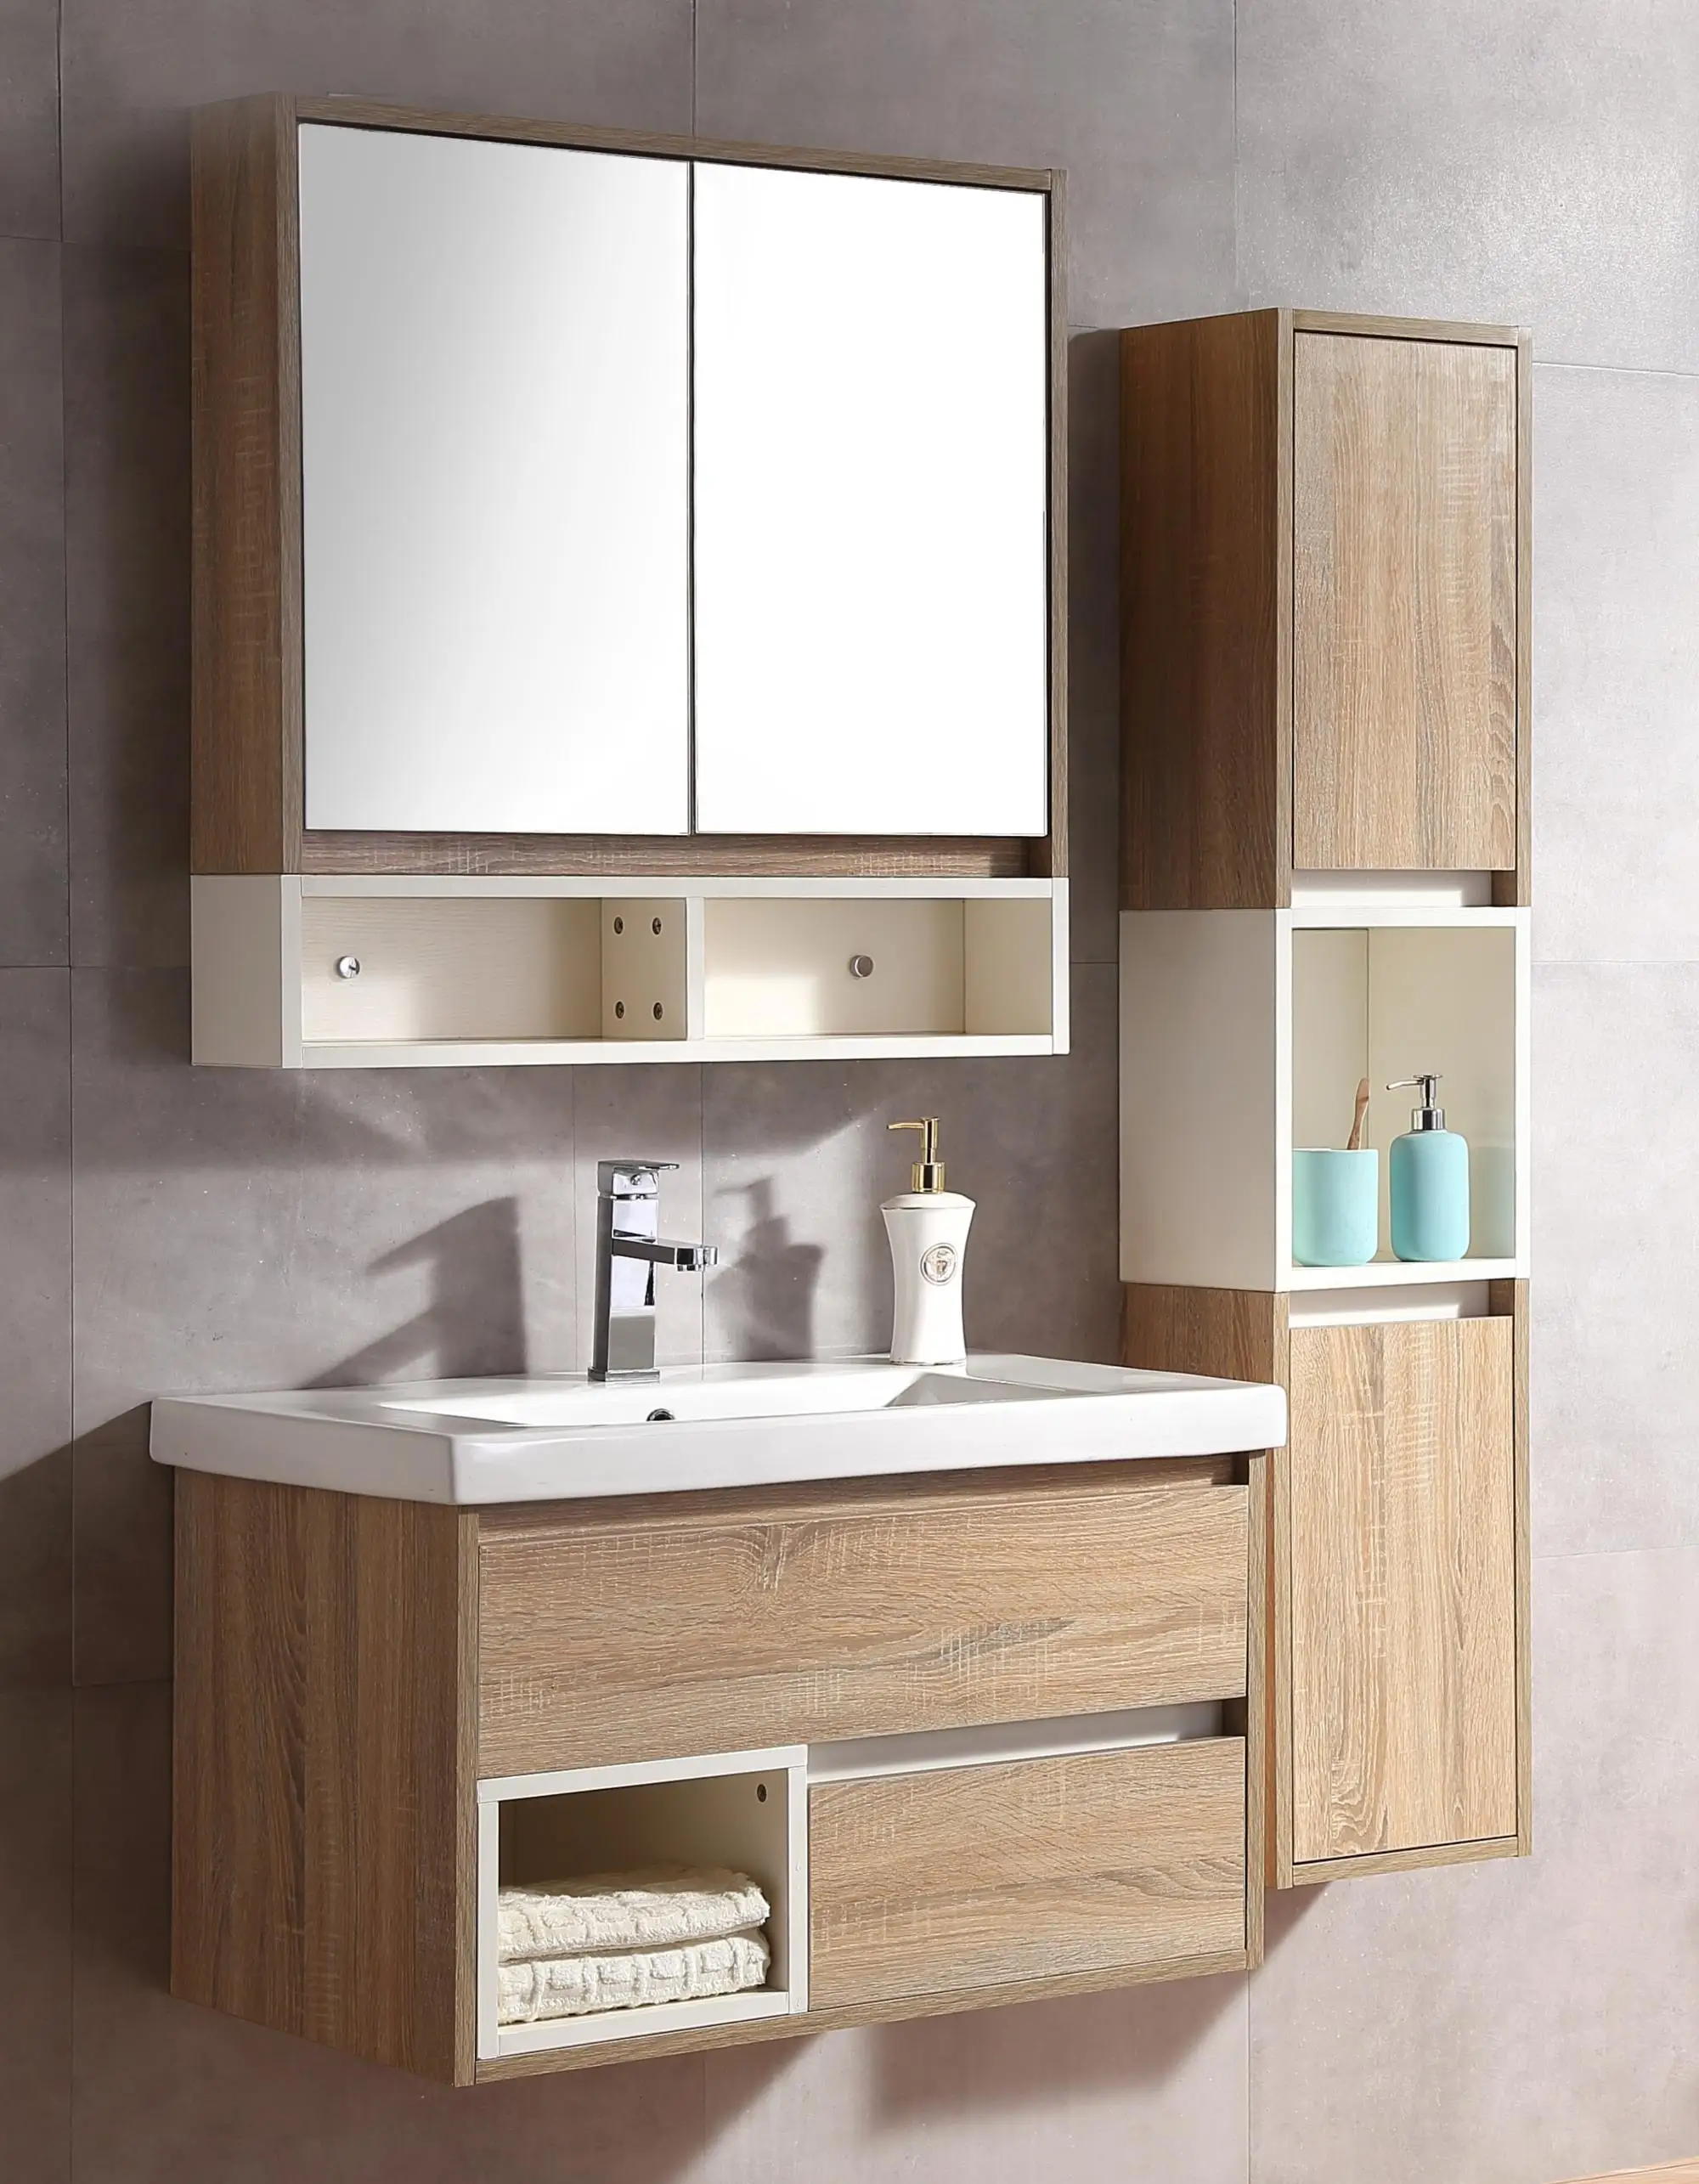 32 Double Sink Bathroom Vanity Set Floating Bath Cabinet With Mirror And Shelf Buy Bathrooms Cabinet With Double Sink